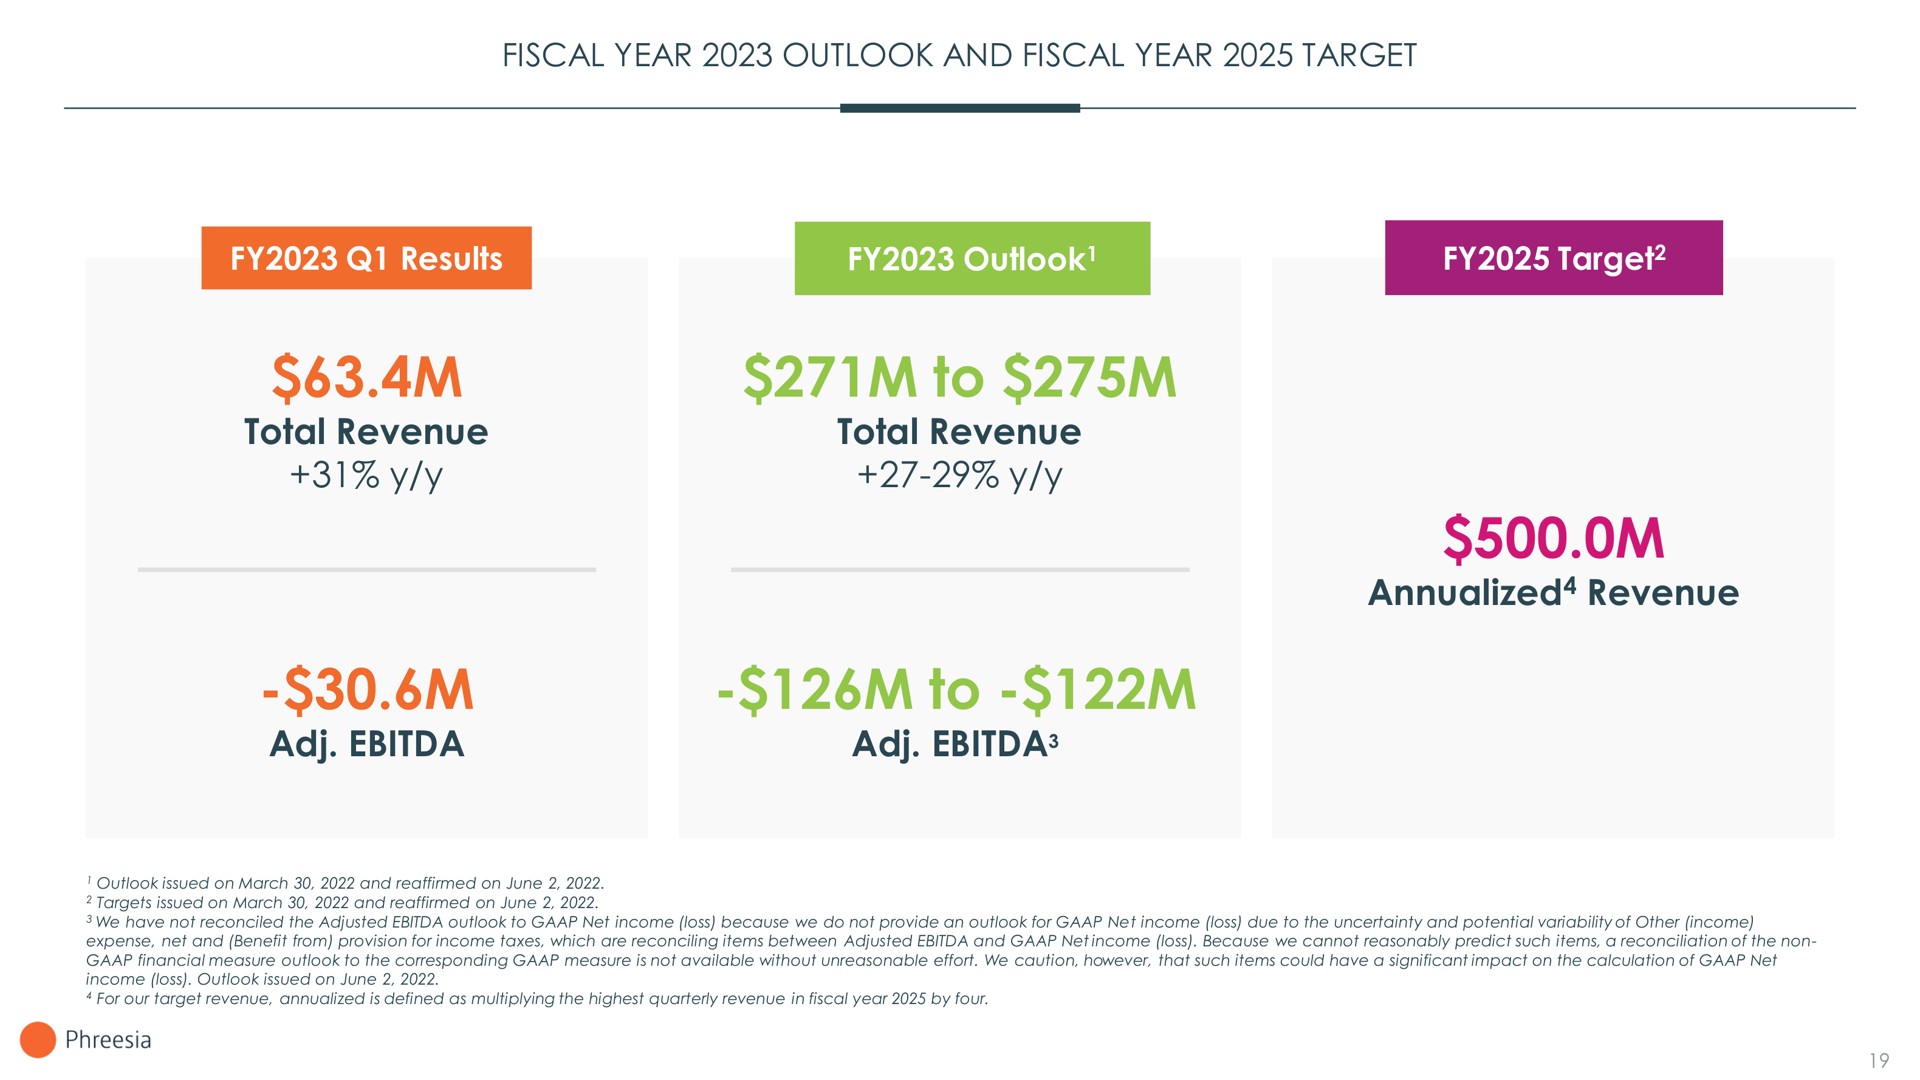 fiscal year outlook and fiscal year target results outlook target total revenue to total revenue to revenue | Phreesia